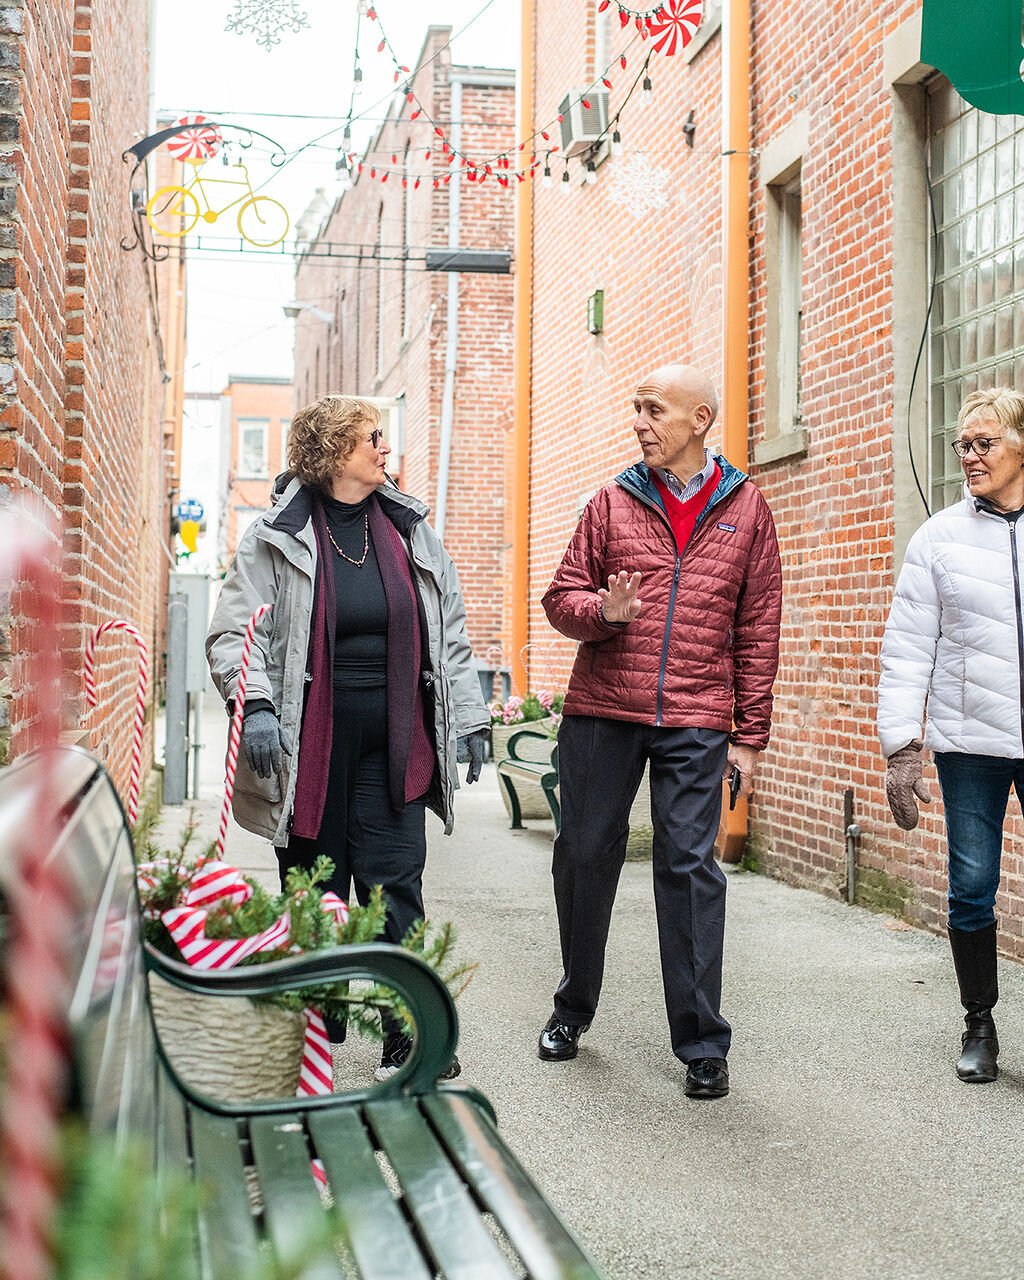 (Left to right) Jan Roland, Dave Haist, and Beverly Vanderpool walk through Downtown Wabash.